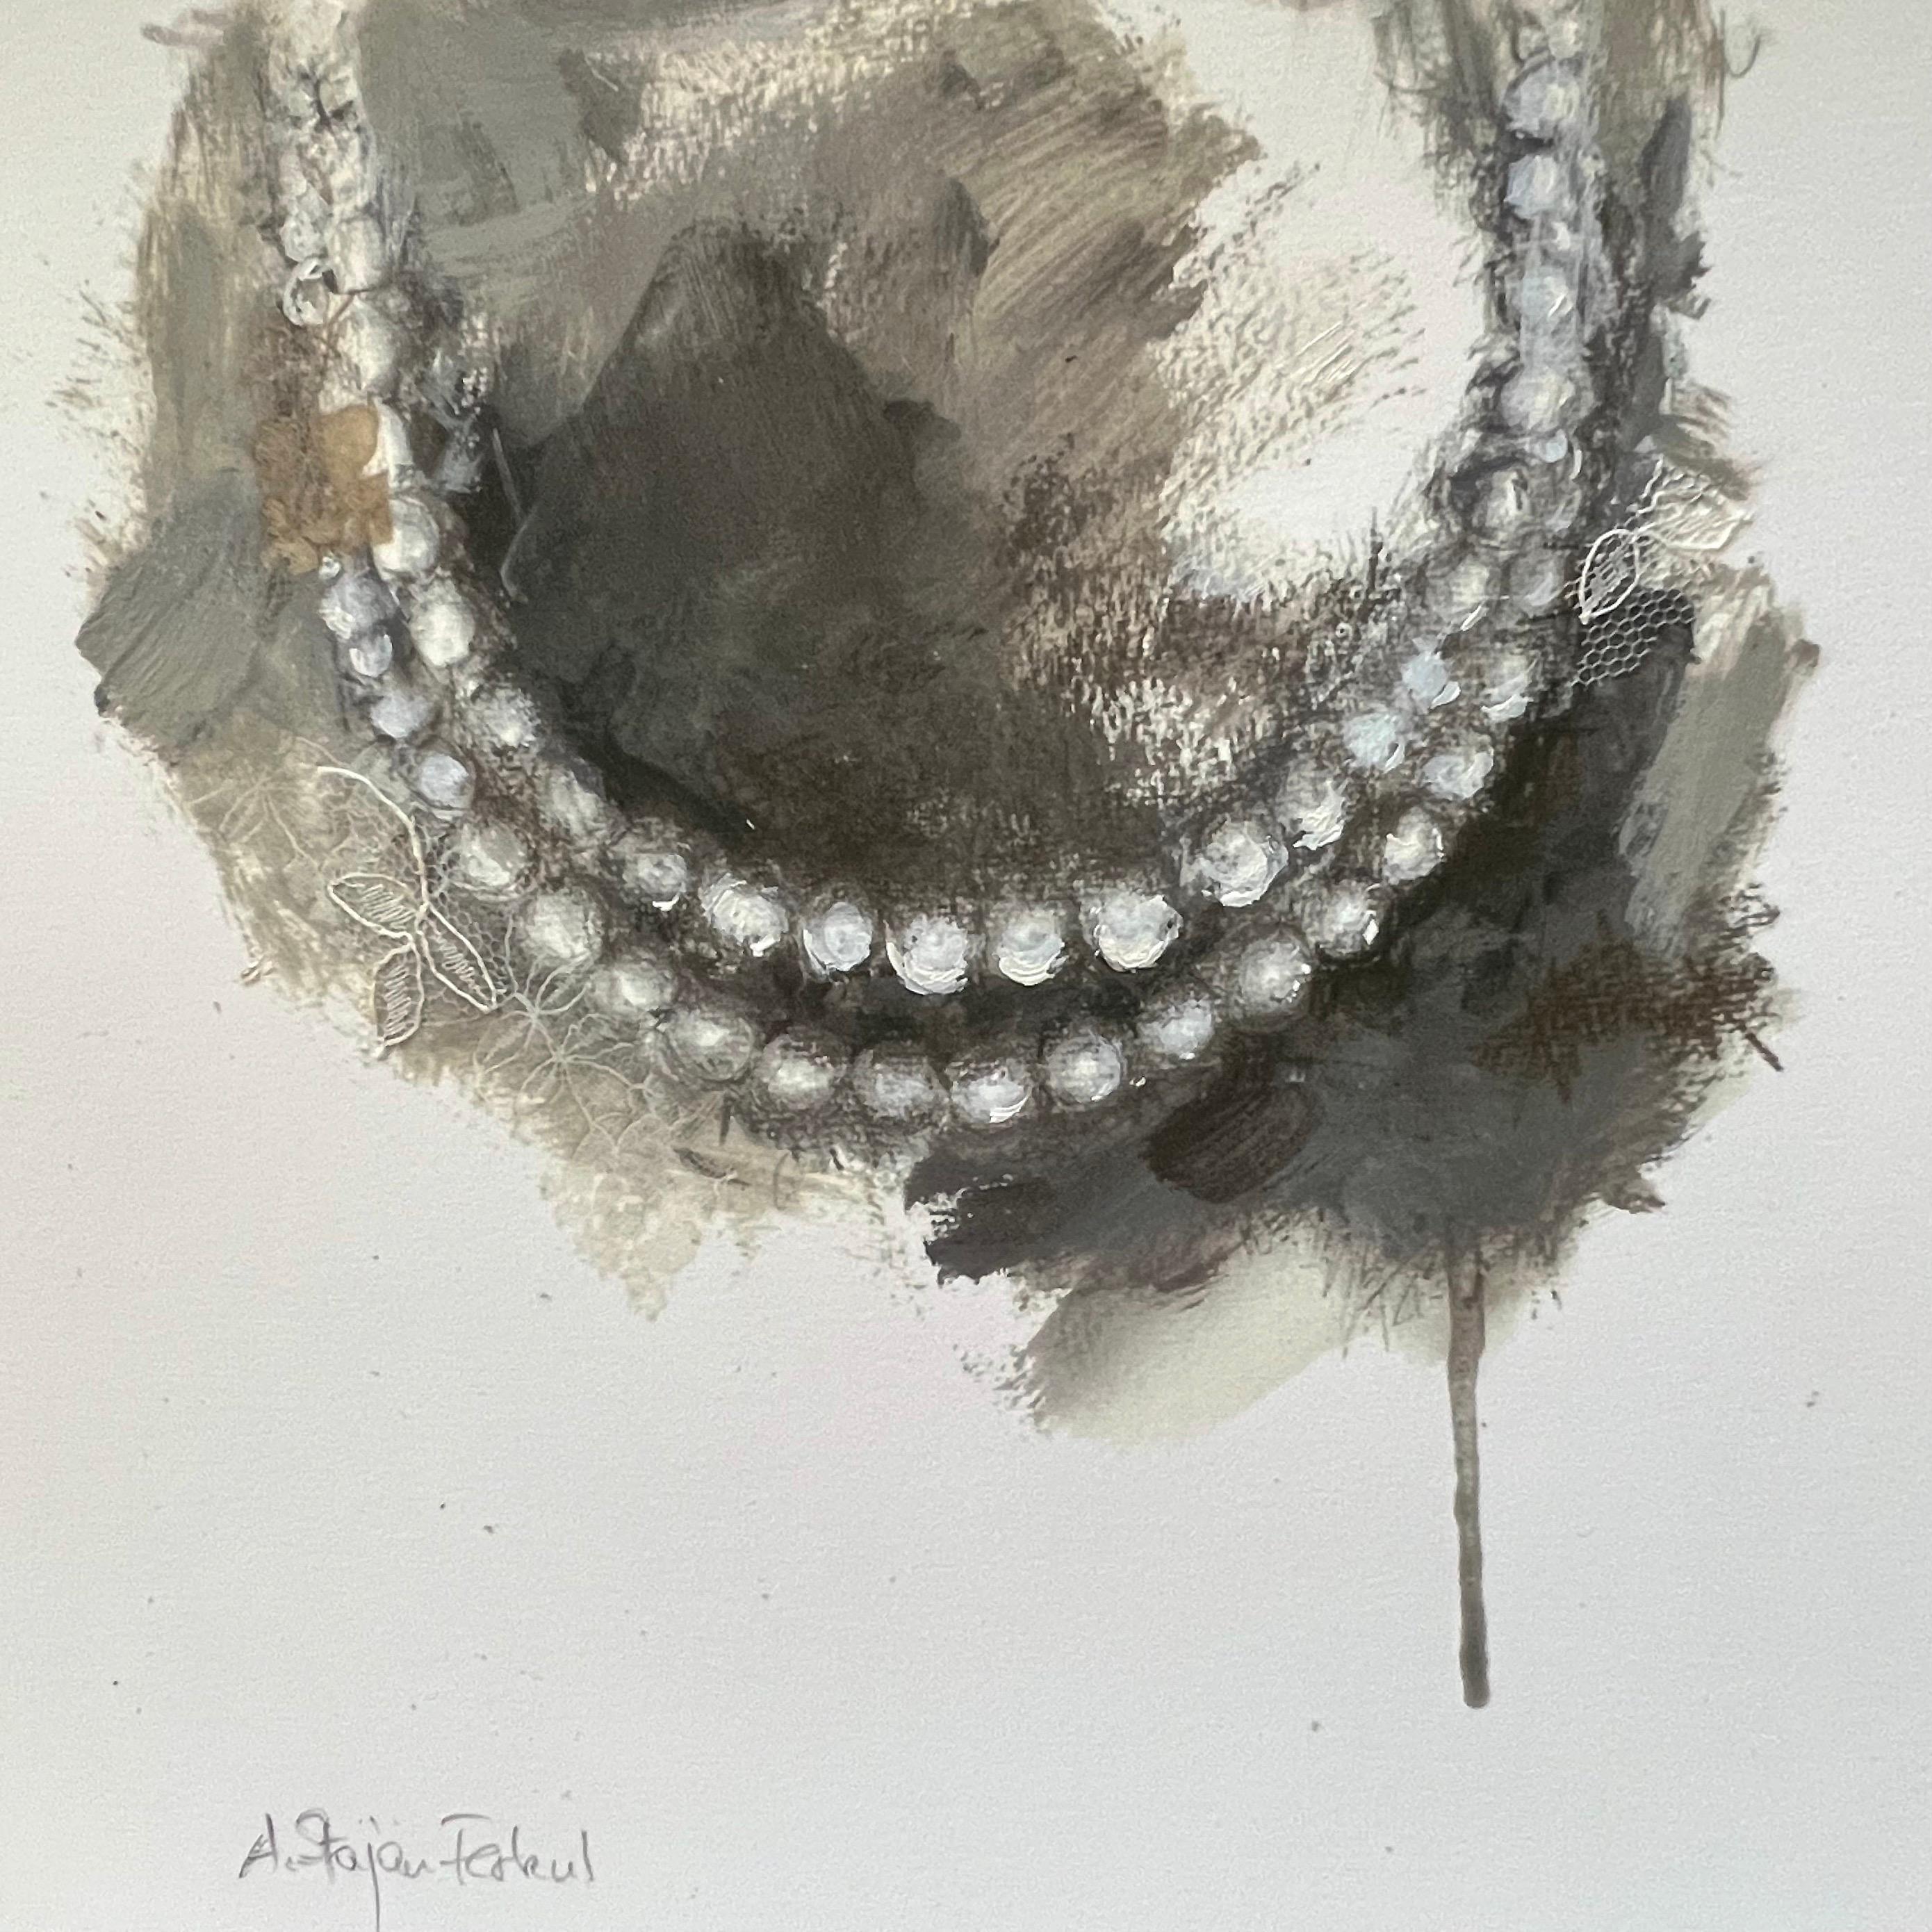 Homage to the classic double strand pearl necklace. The fusion of digital and hand painted elements give this artwork distinct character and individuality. The one-of-a-kind Giclée print is a high-quality reproduction of an original artwork, printed